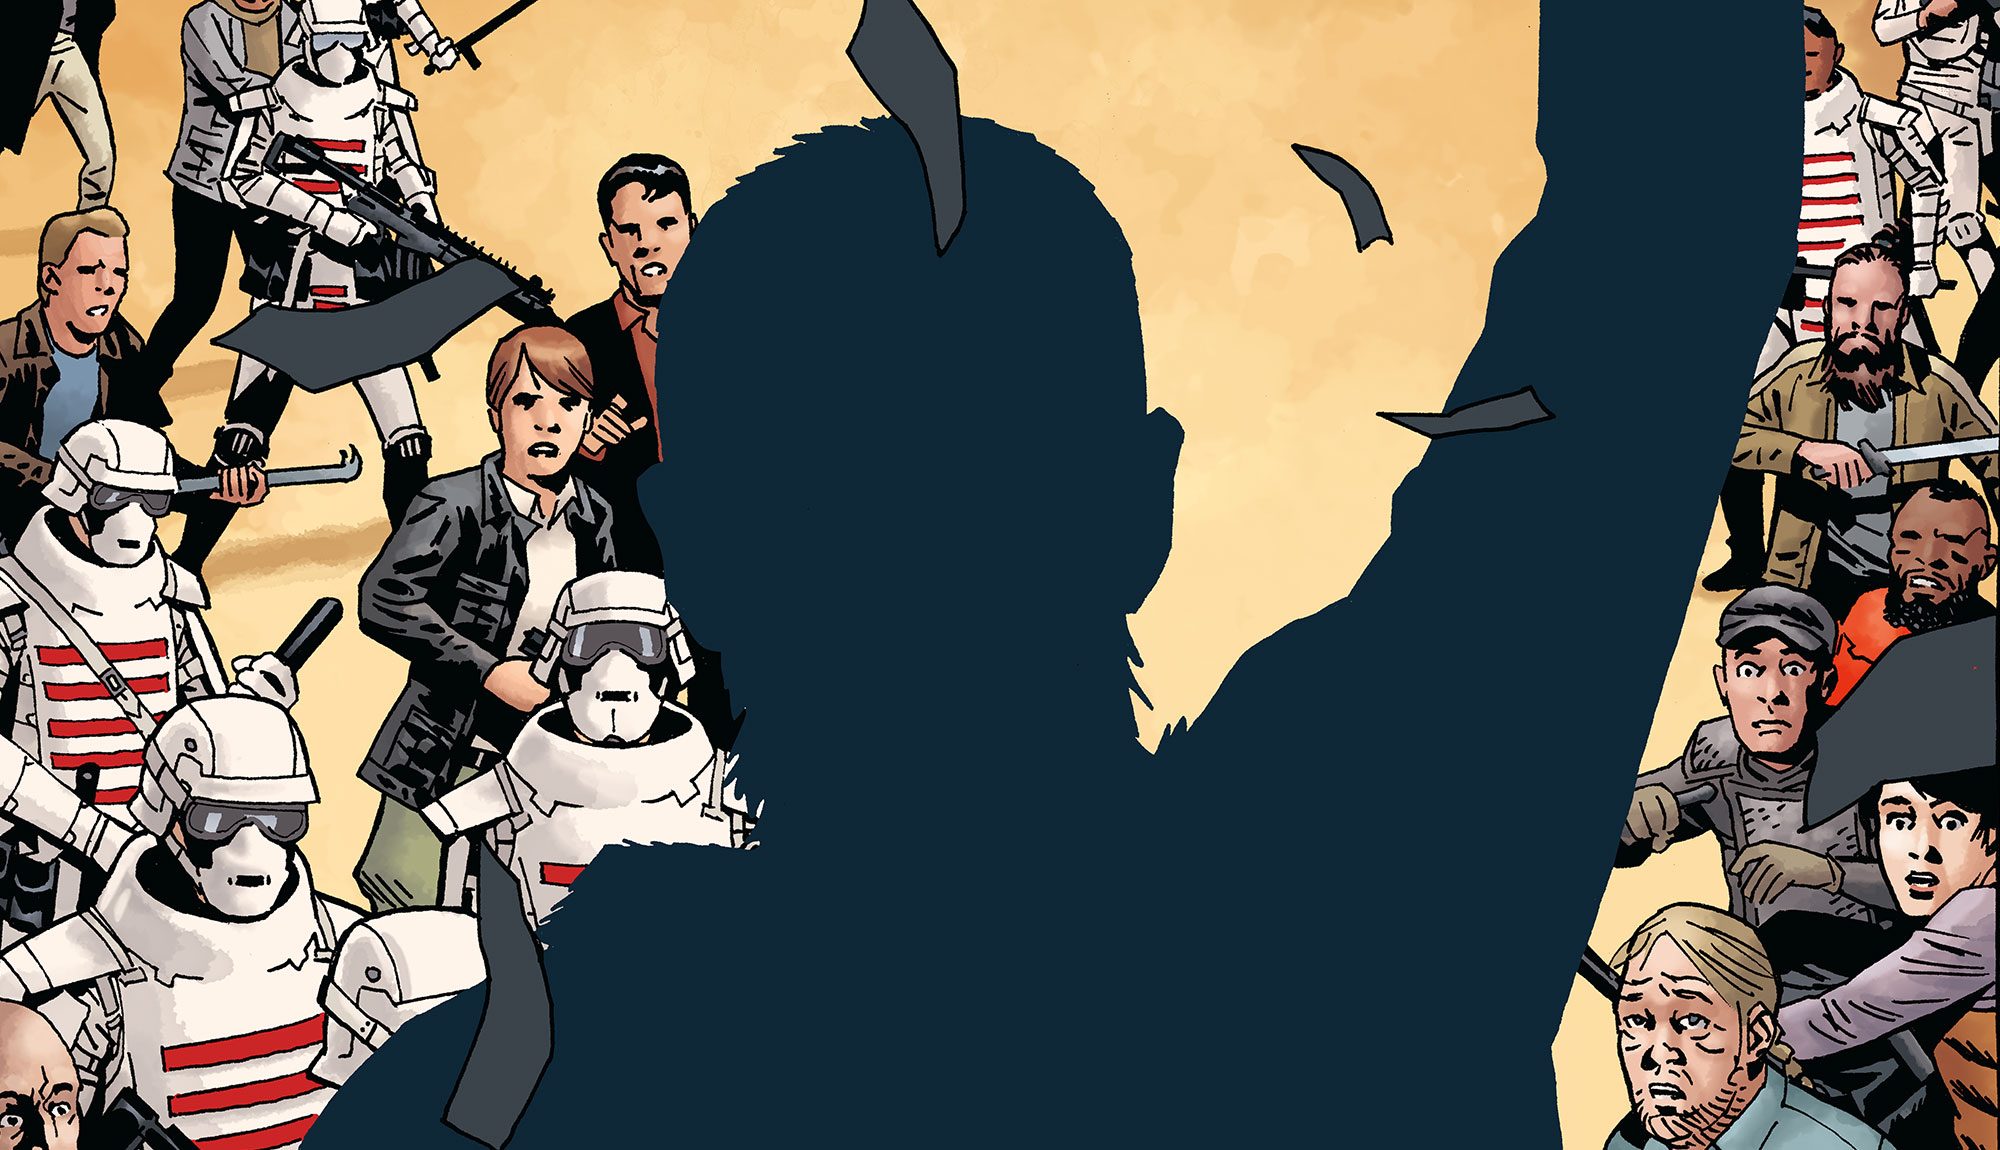 Go Inside The Walking Dead Issue 191 With This Exclusive Preview